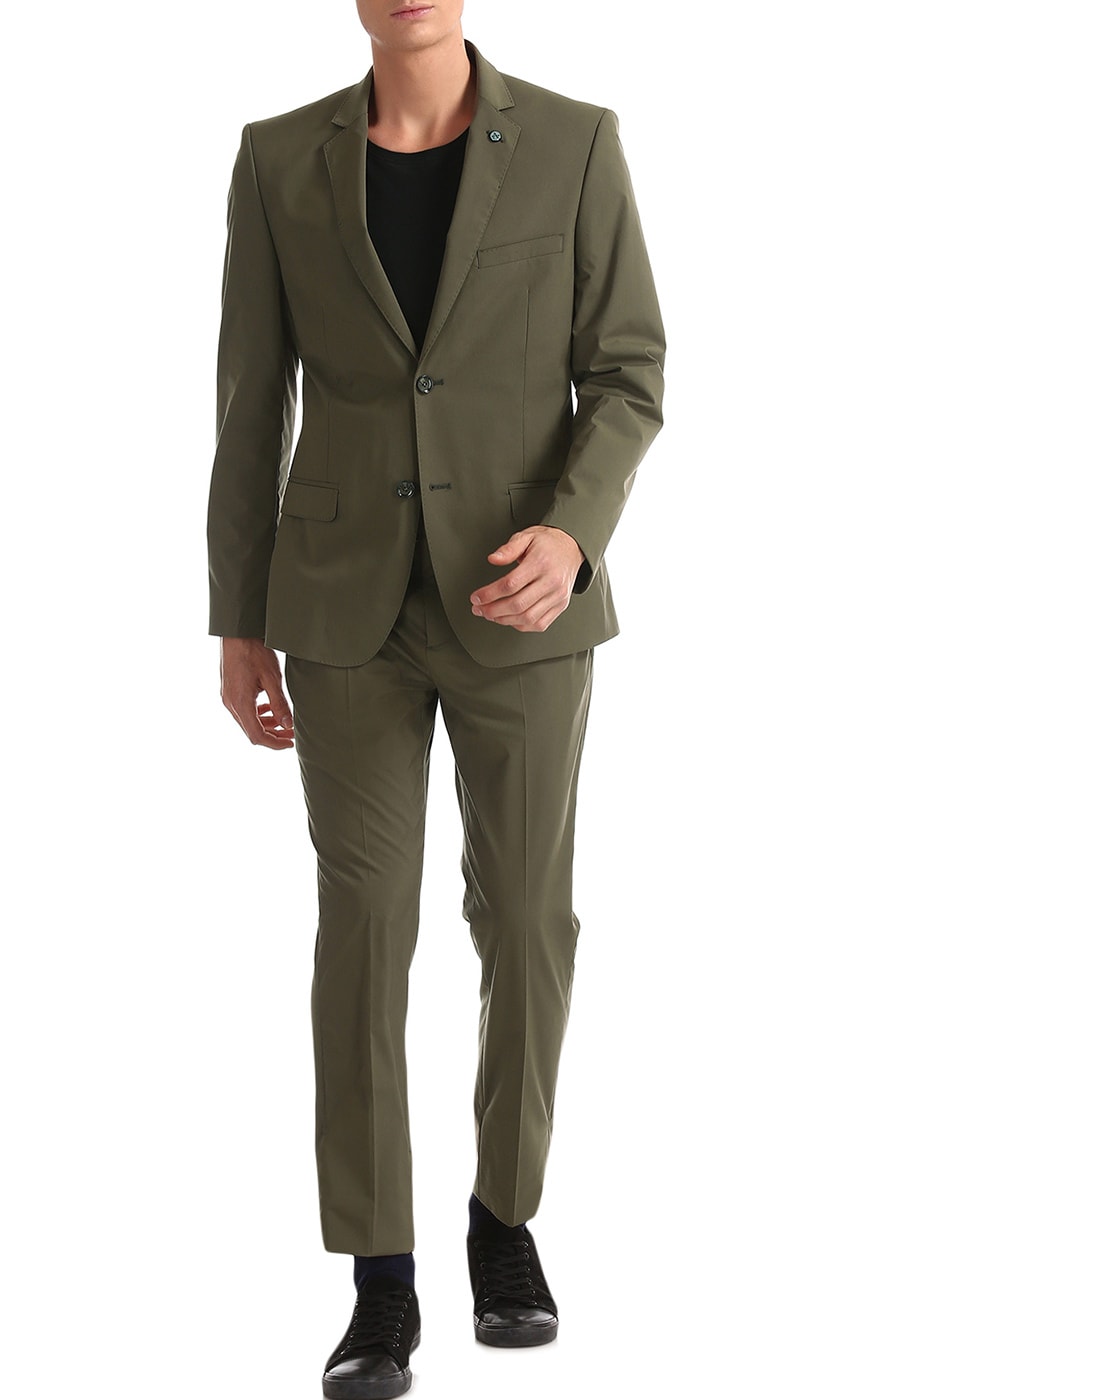 Green Slim Fit Double Breasted Olive Green Suit Men With Gold Button  Customizable Formal Wear For Weddings And Business Coat And Pants Included  From Xiguanchu, $93.82 | DHgate.Com